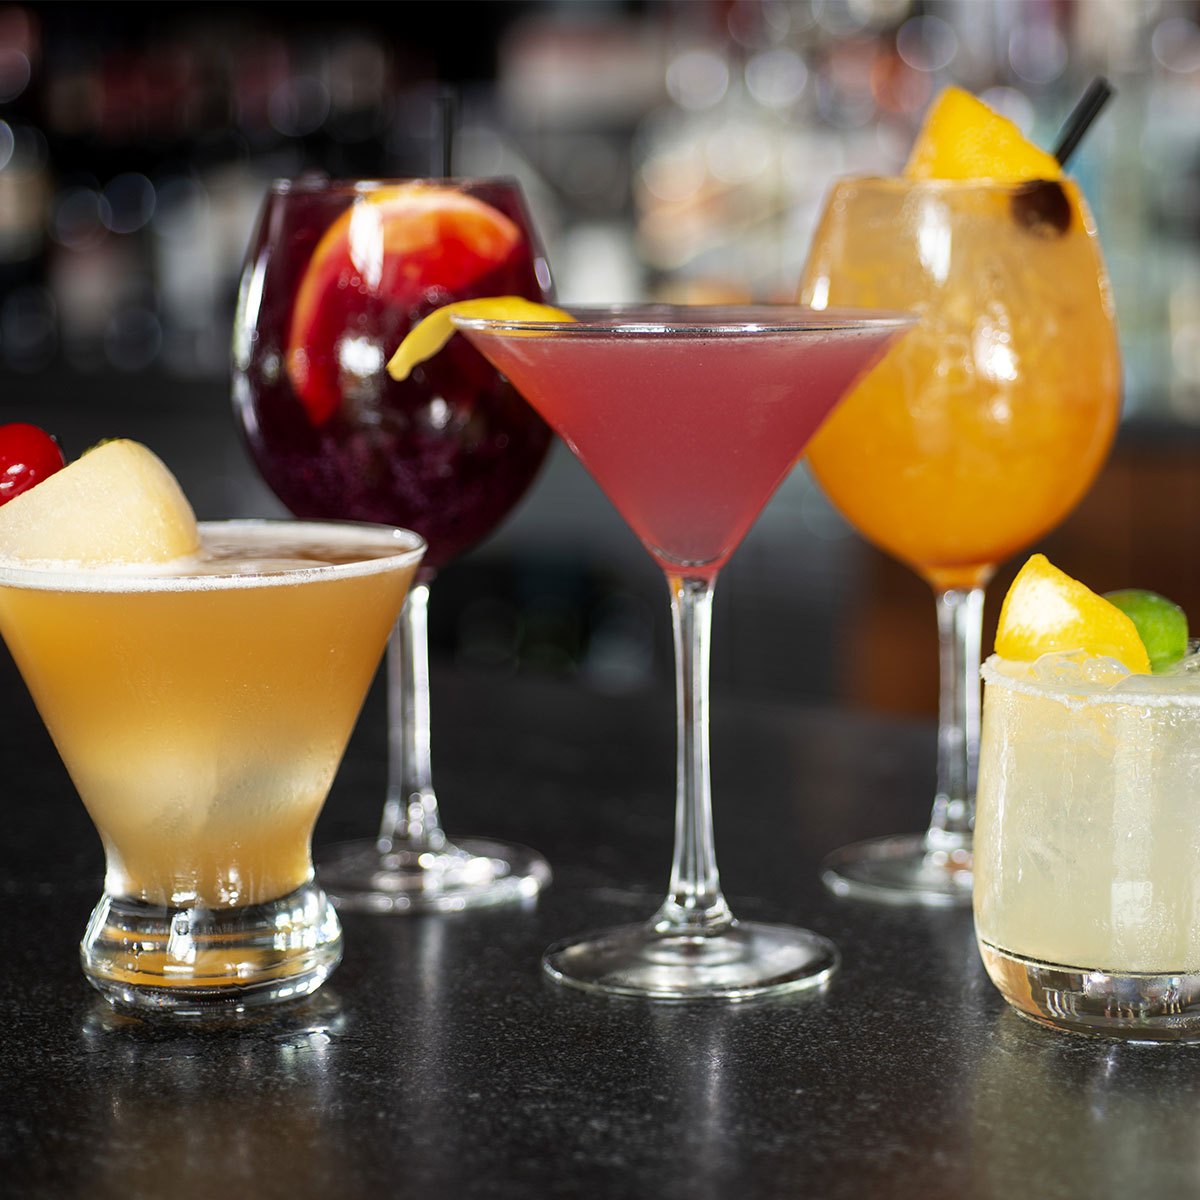 A selection of different colored cocktails with fruit adornments at Burtons Boca Raton location